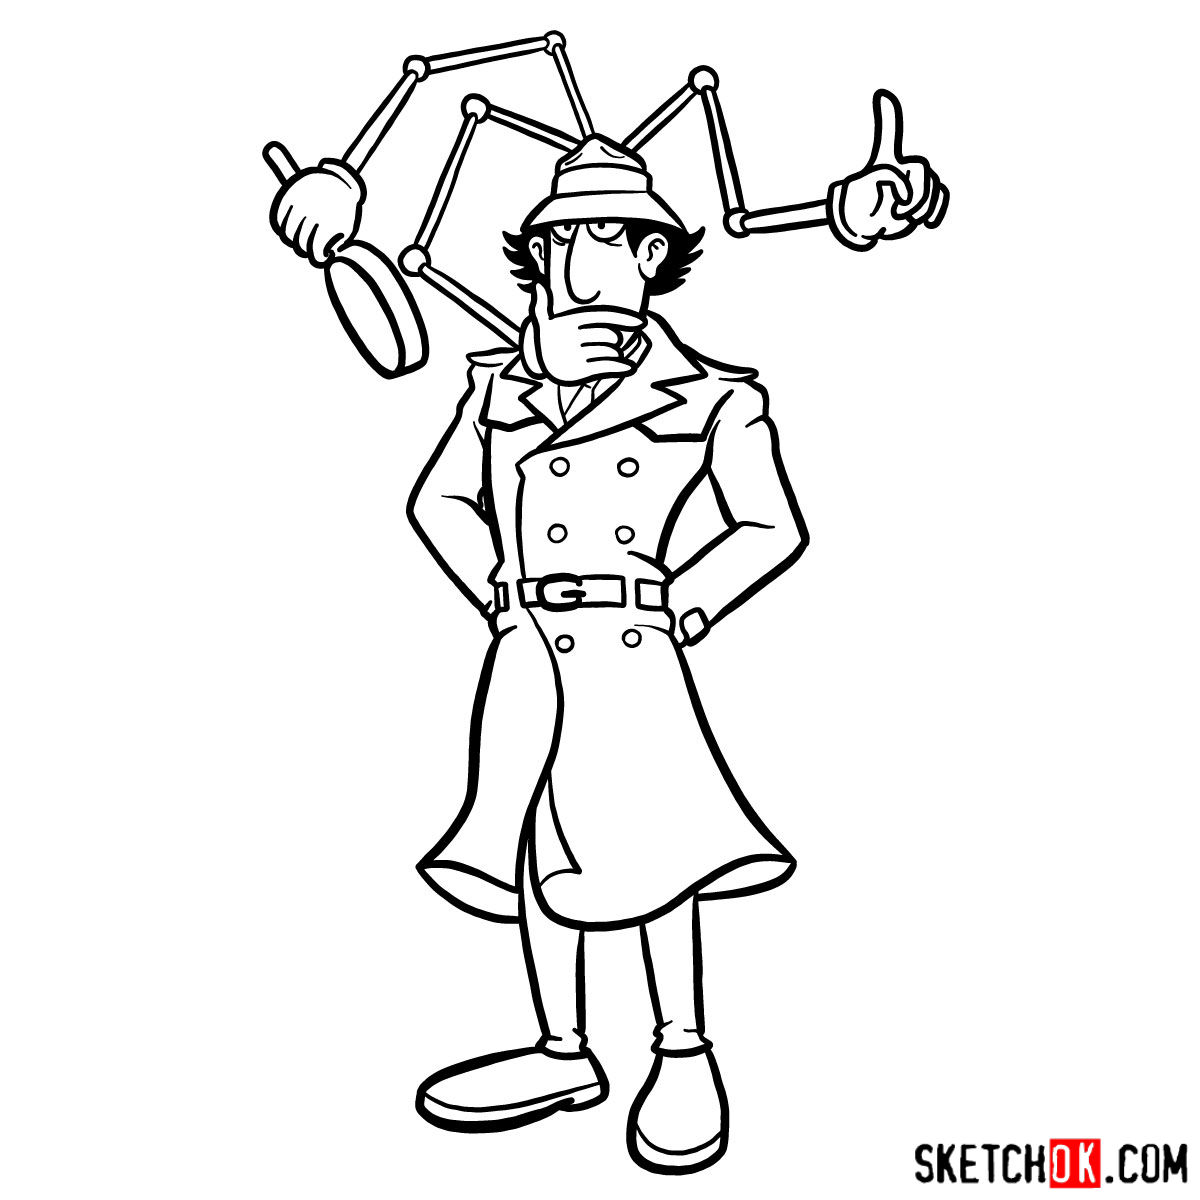 How to draw Inspector Gadget - step 17